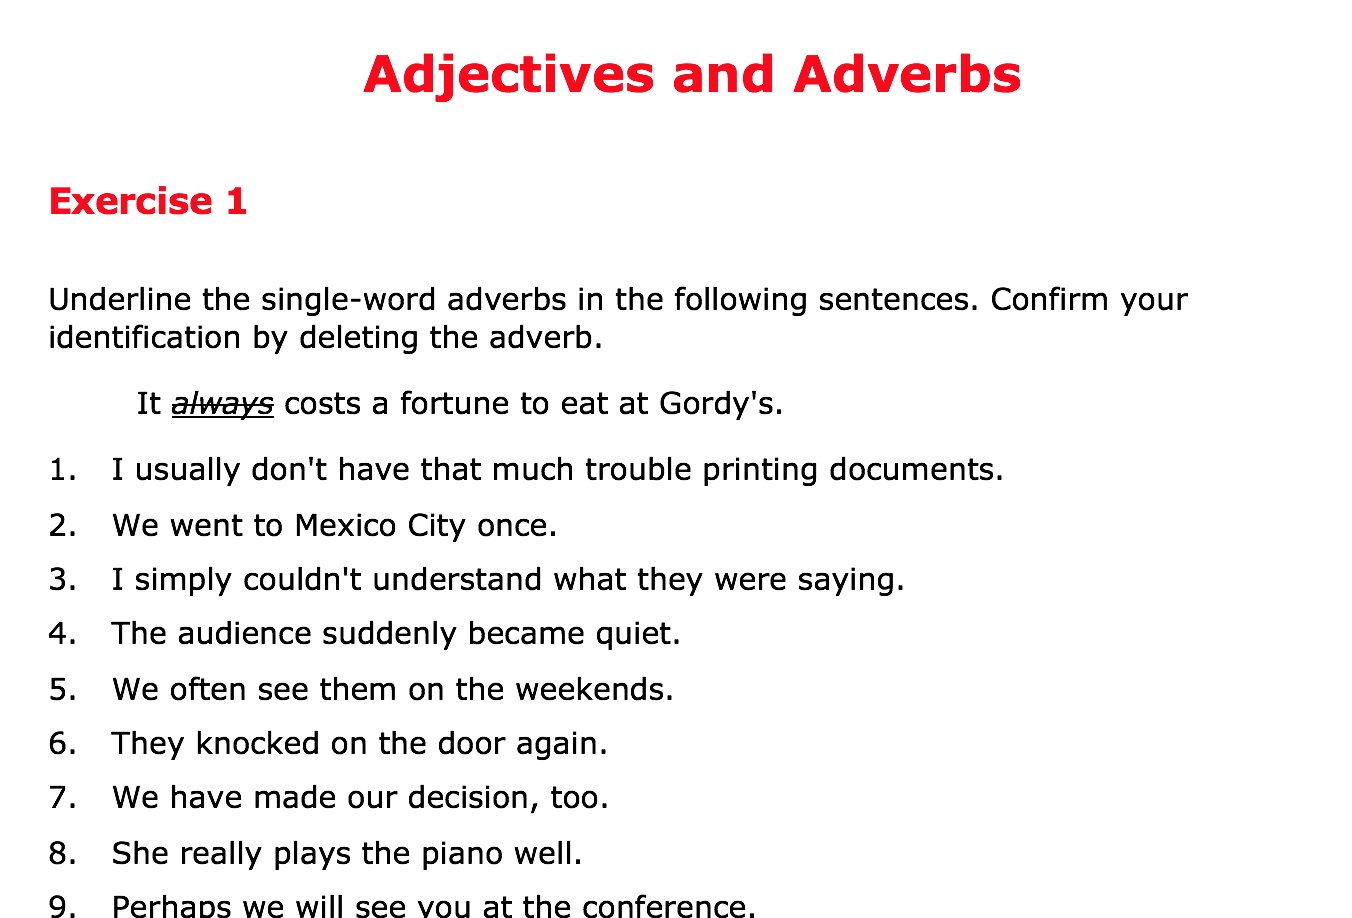 adjectives-and-adverbs-with-magical-horses-worksheet-answers-adjective-or-adverb-2nd-or-3rd